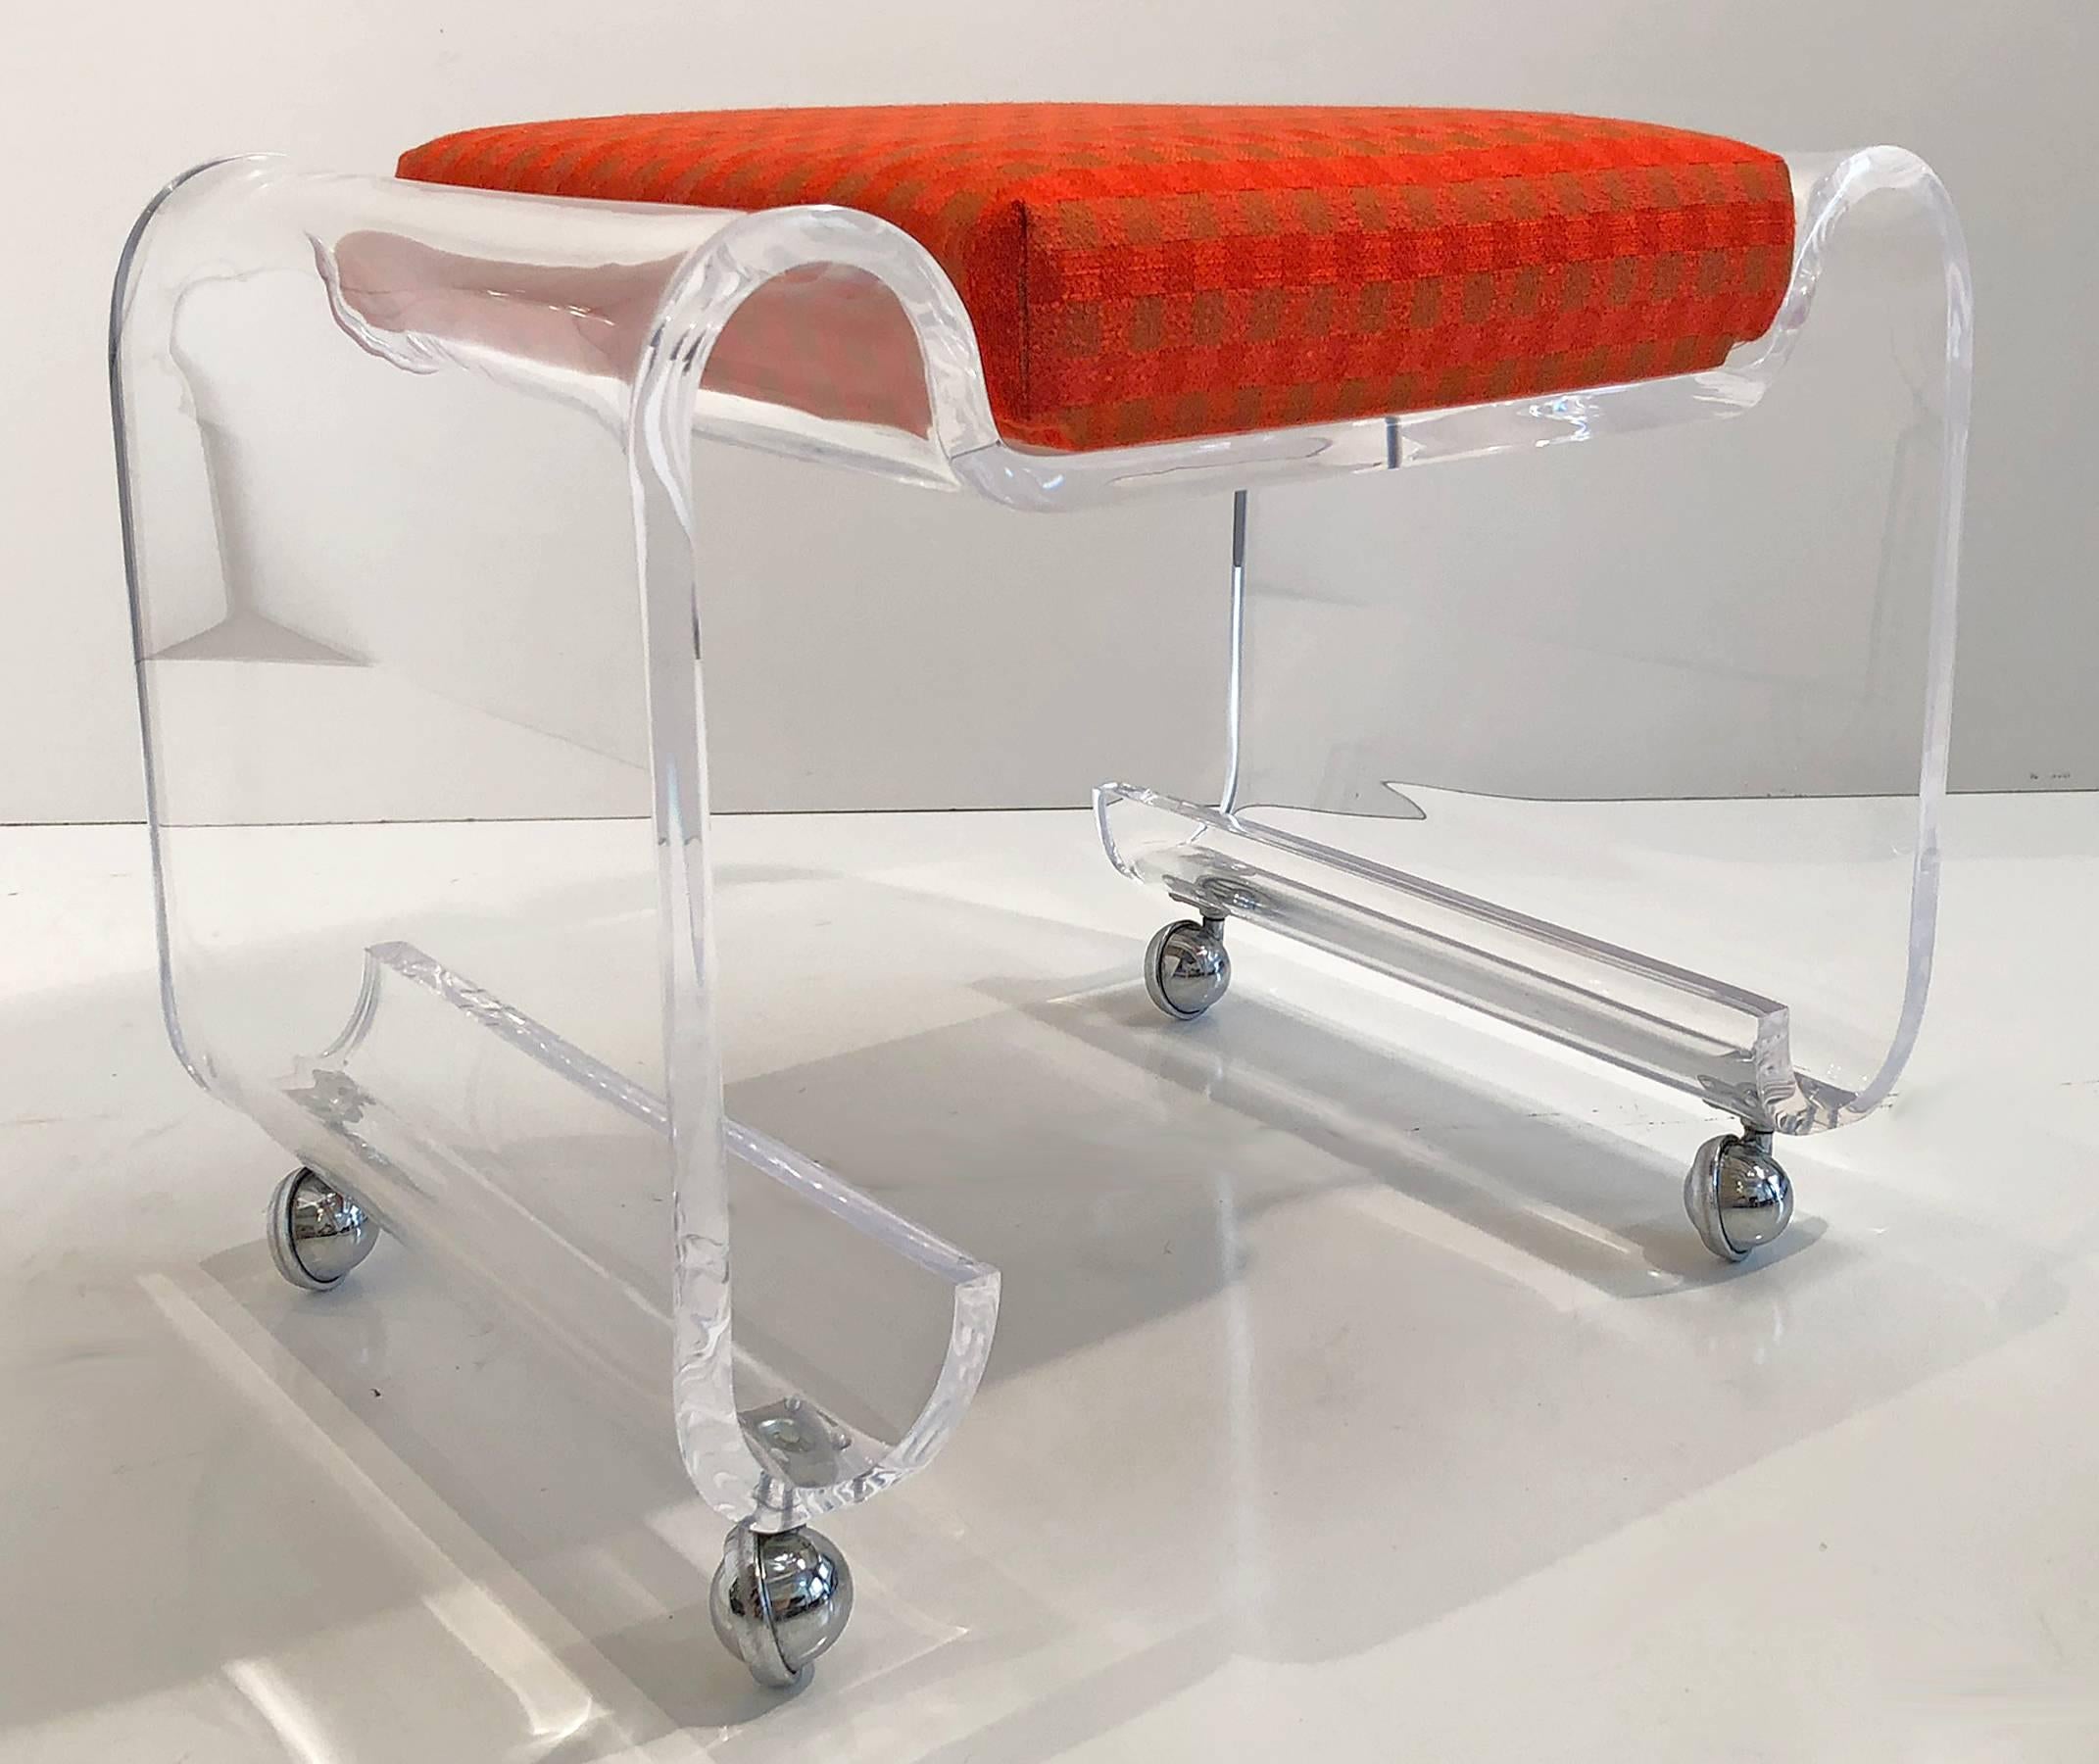 Lucite stool on casters with upholstered seat. Heavy clear Lucite. Top quality materials and design.